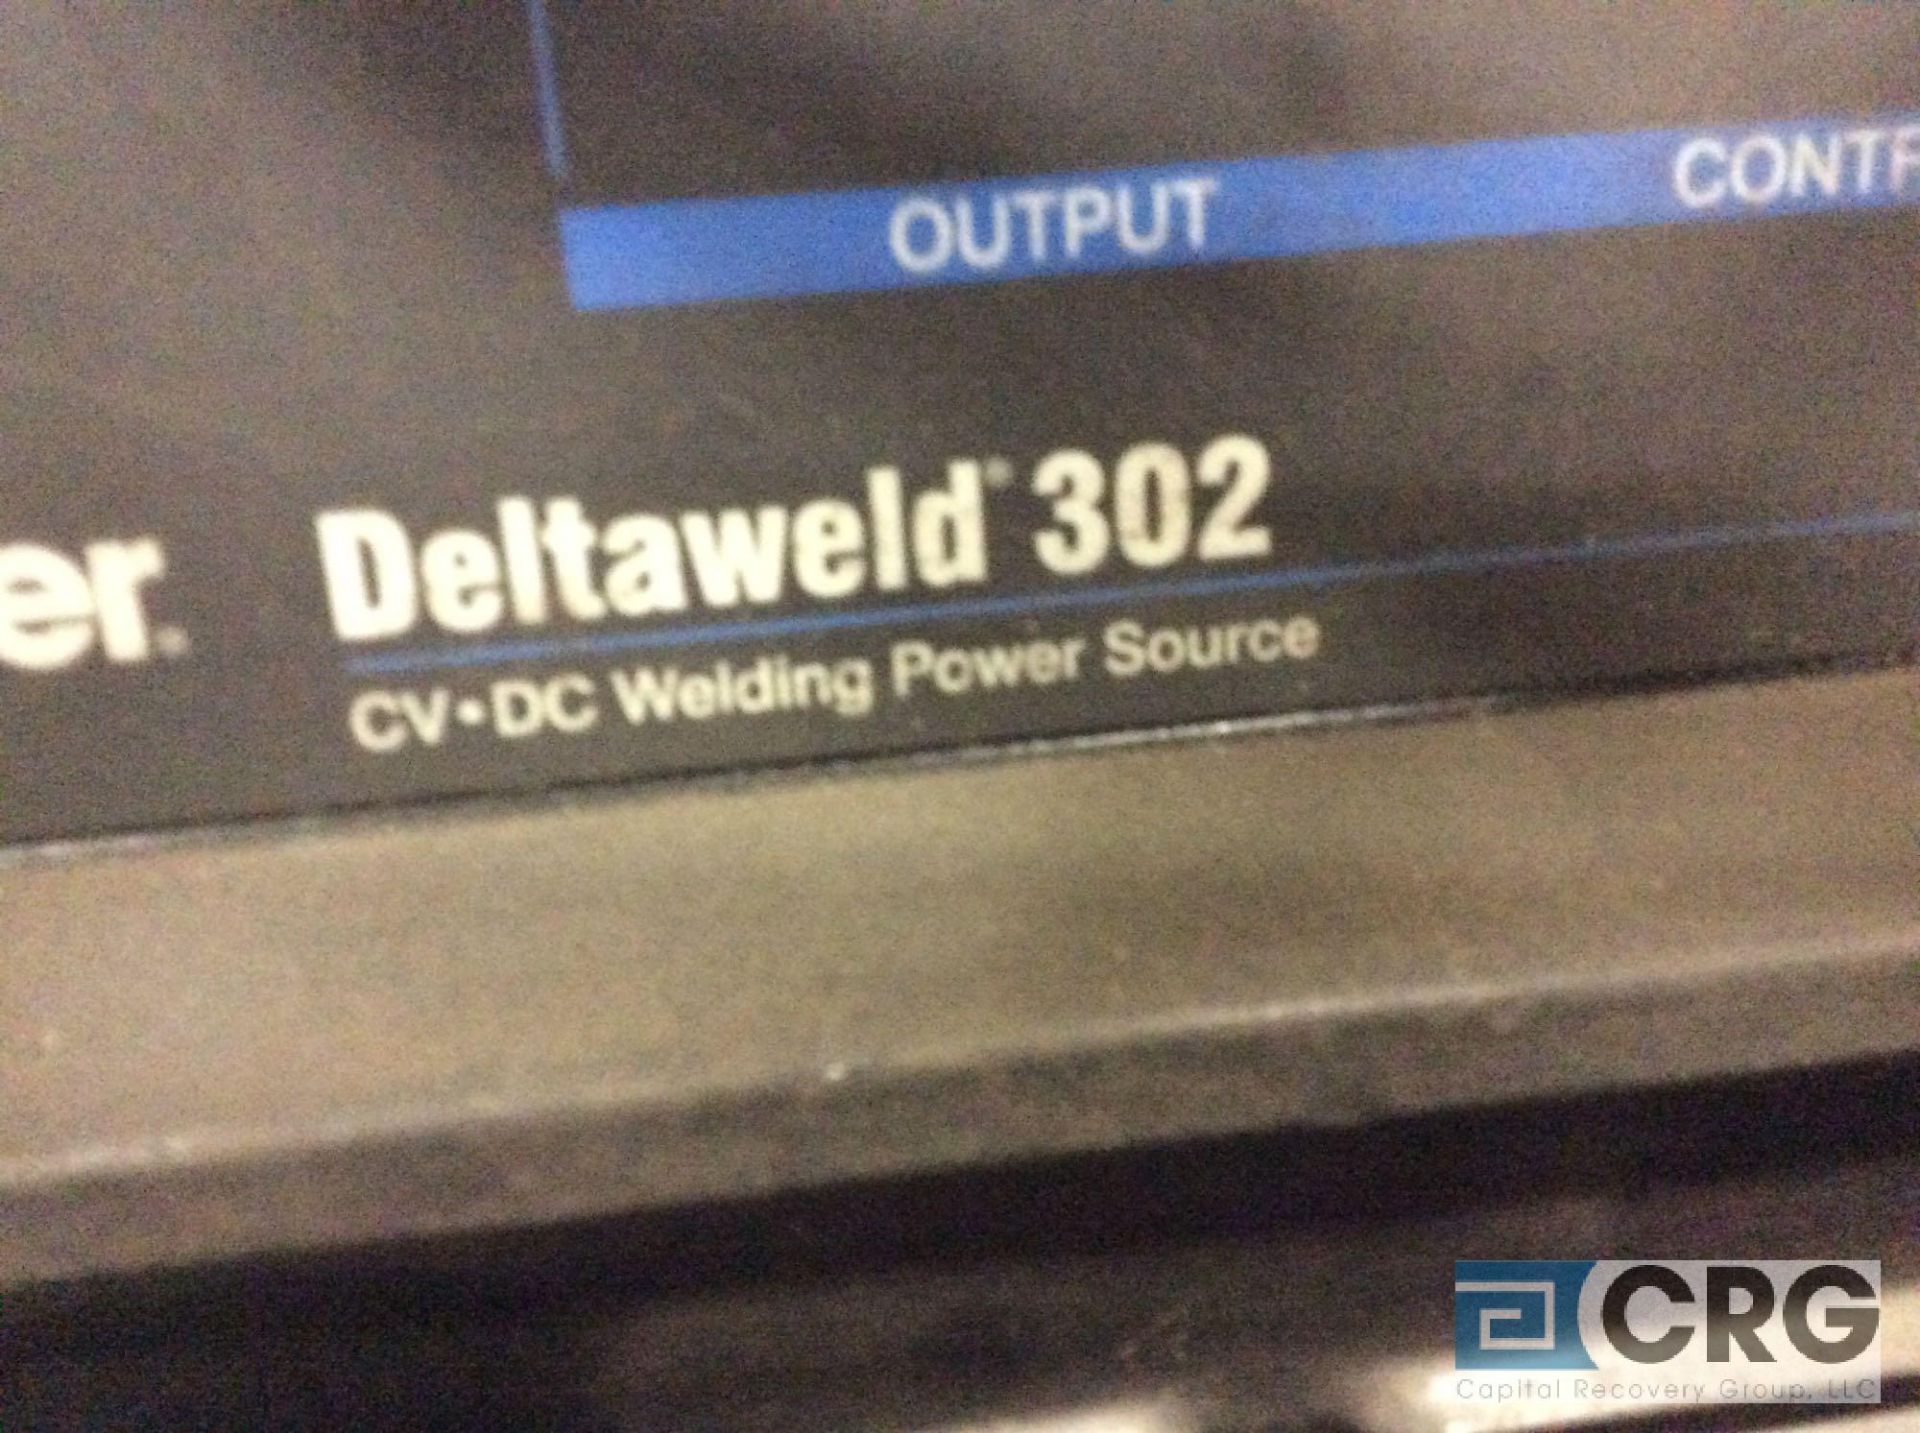 Miller DELTAWELD 302 CV/DC welder, 44 max OCV, 3 phase,With 70 Series wire feed - Image 2 of 3